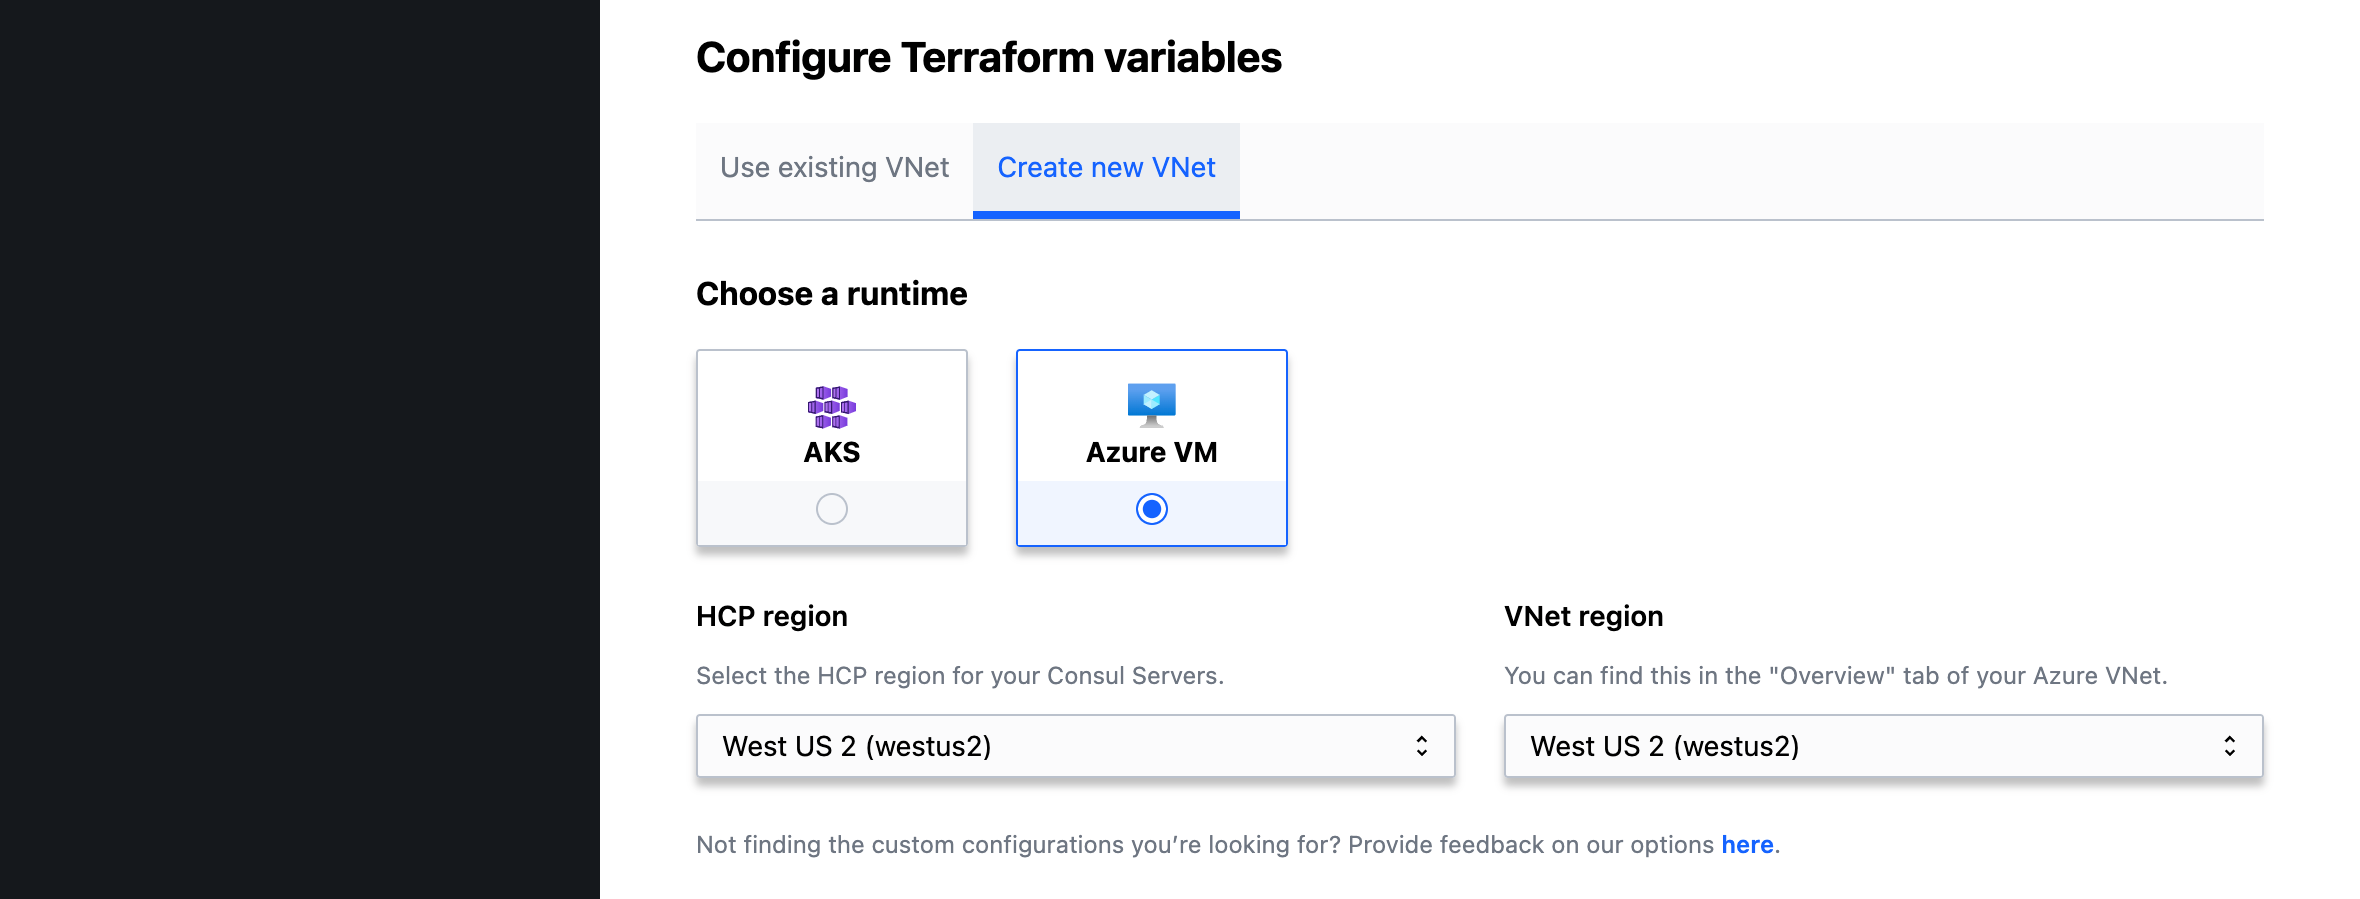 HCP UI Consul - Deploy with Terraform - VM with new
VNet